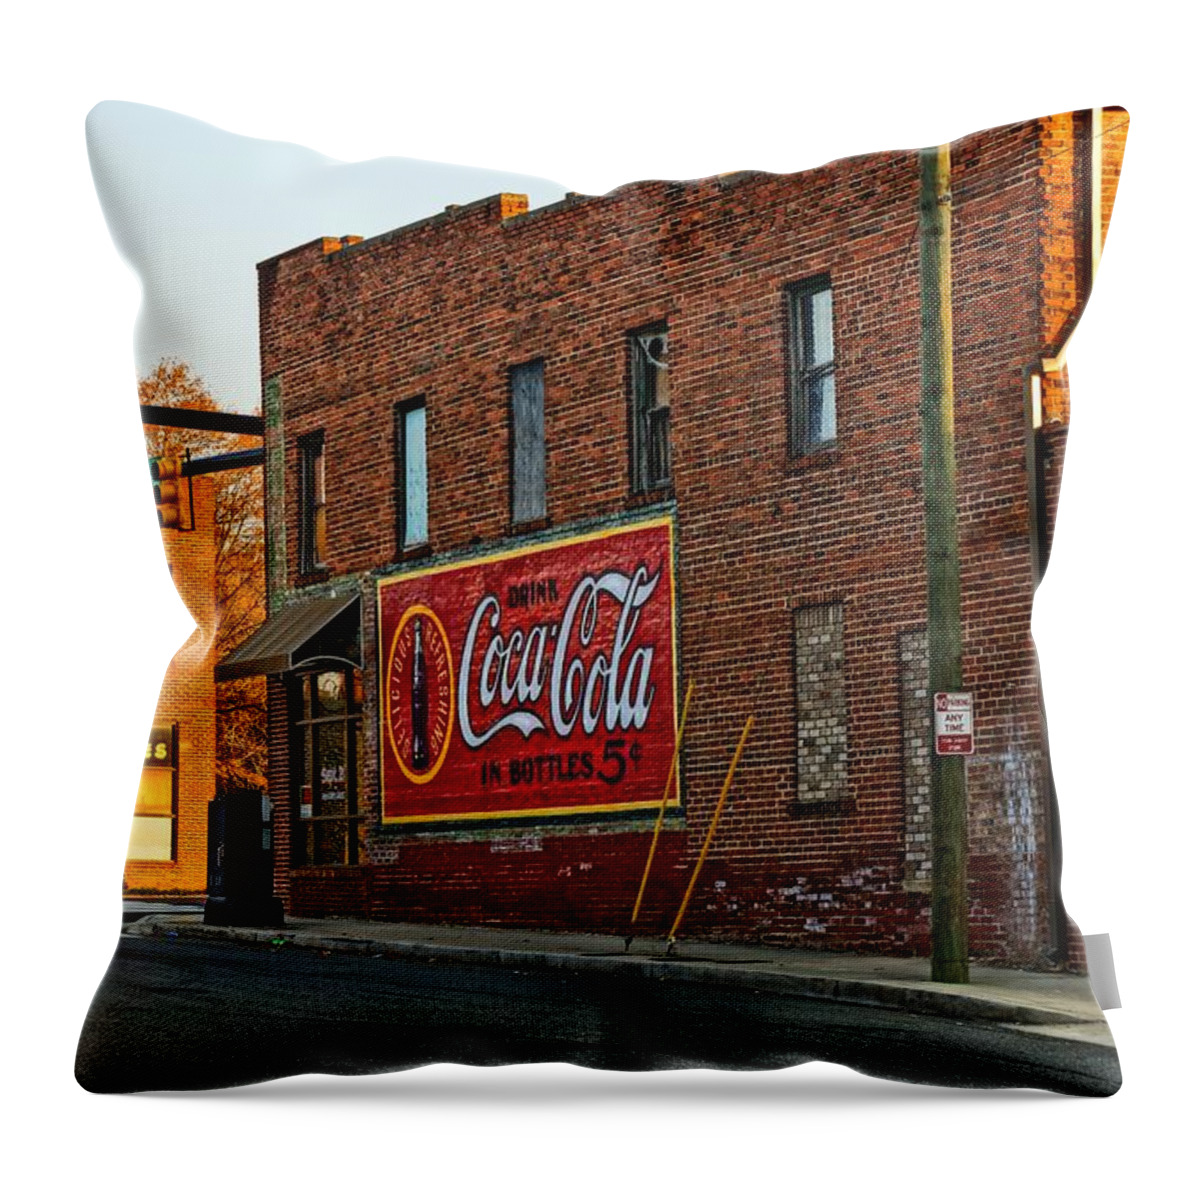  Throw Pillow featuring the photograph On Vance Street by Rodney Lee Williams